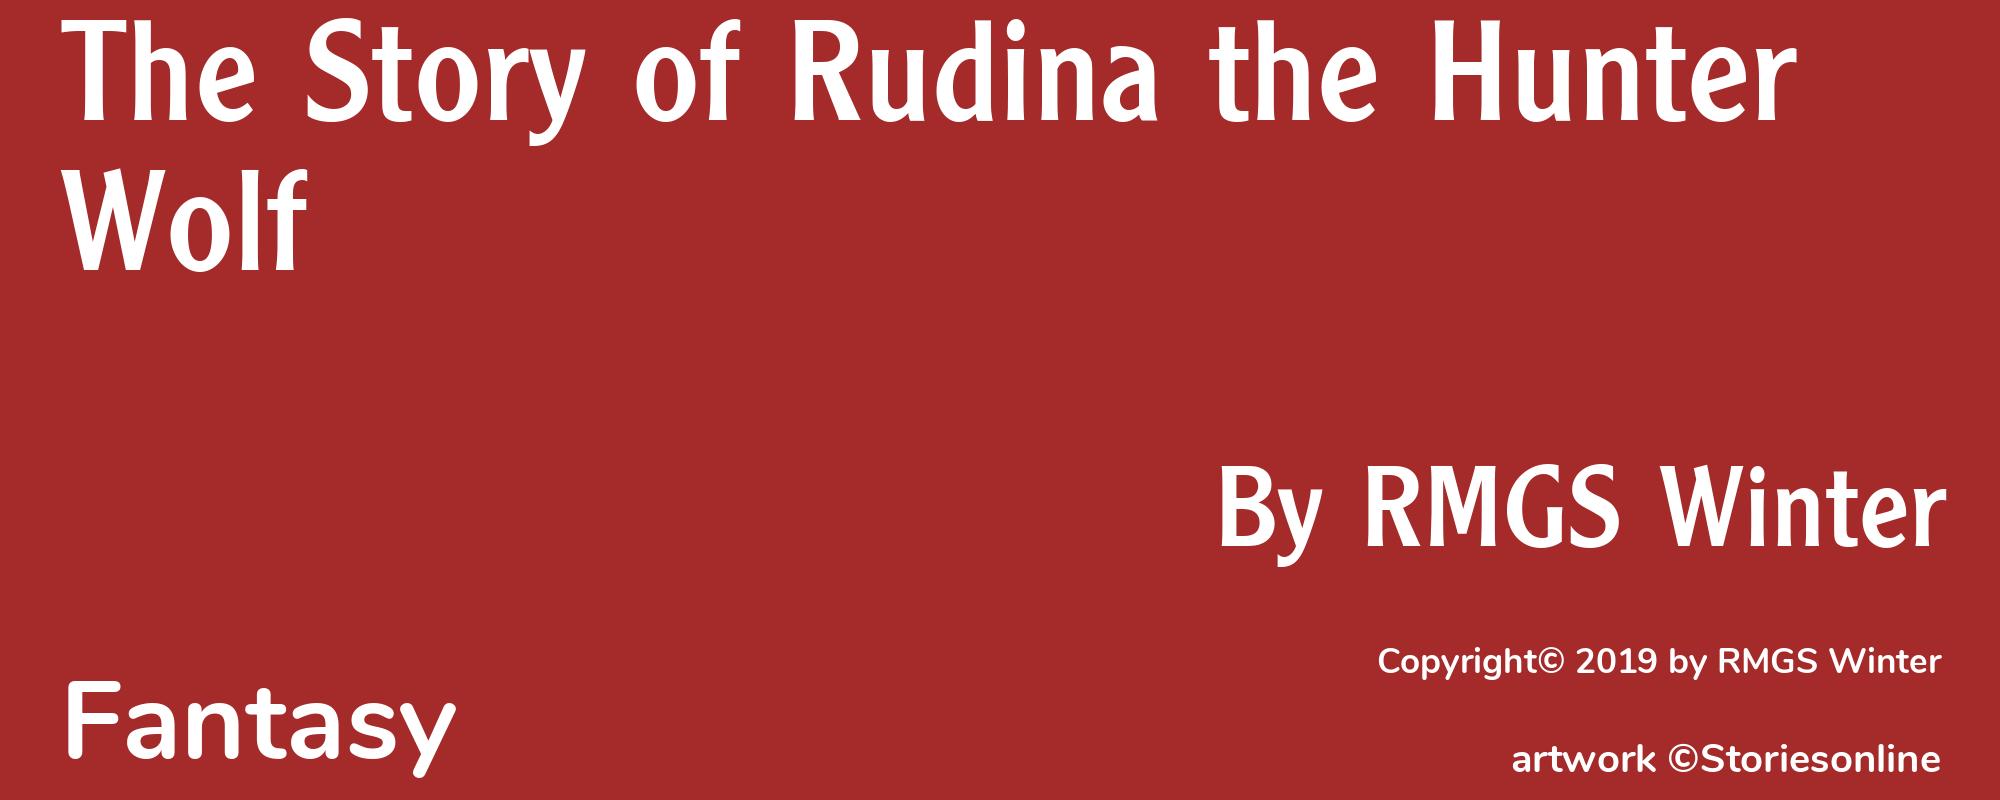 The Story of Rudina the Hunter Wolf - Cover